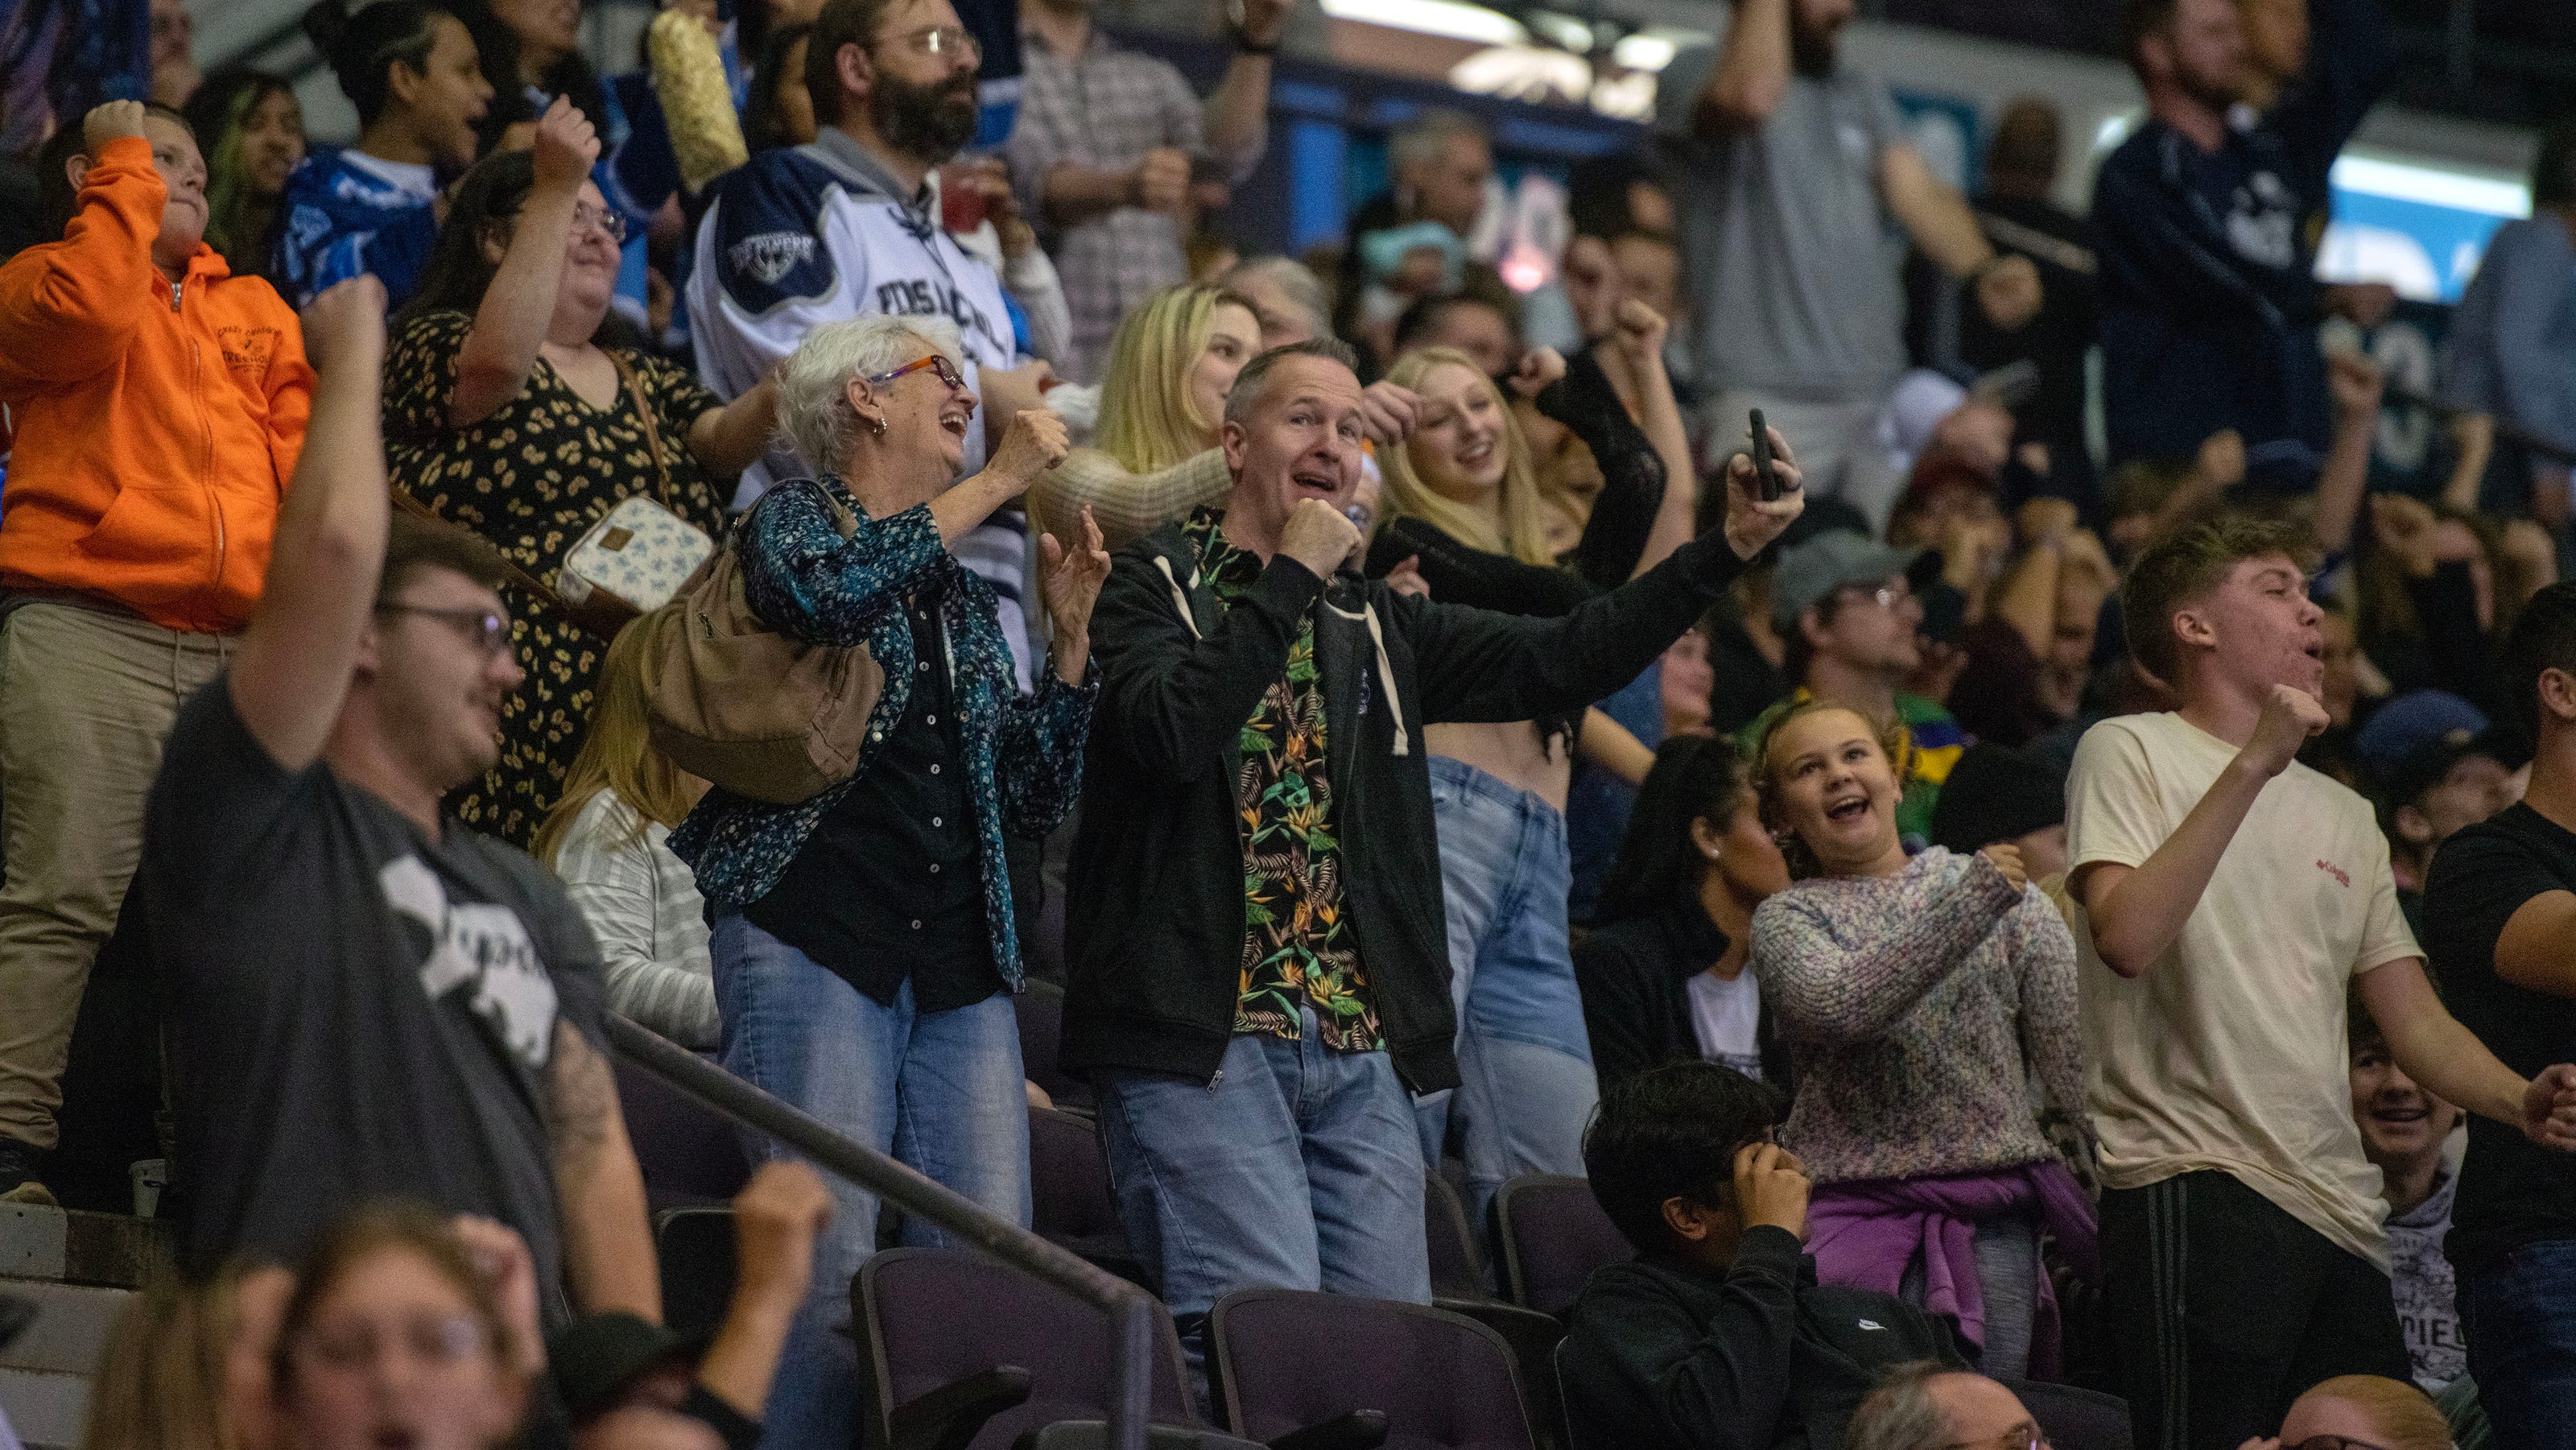   
																Pensacola Hockey: Ice Flyers attain record-setting season with home attendance 
															 